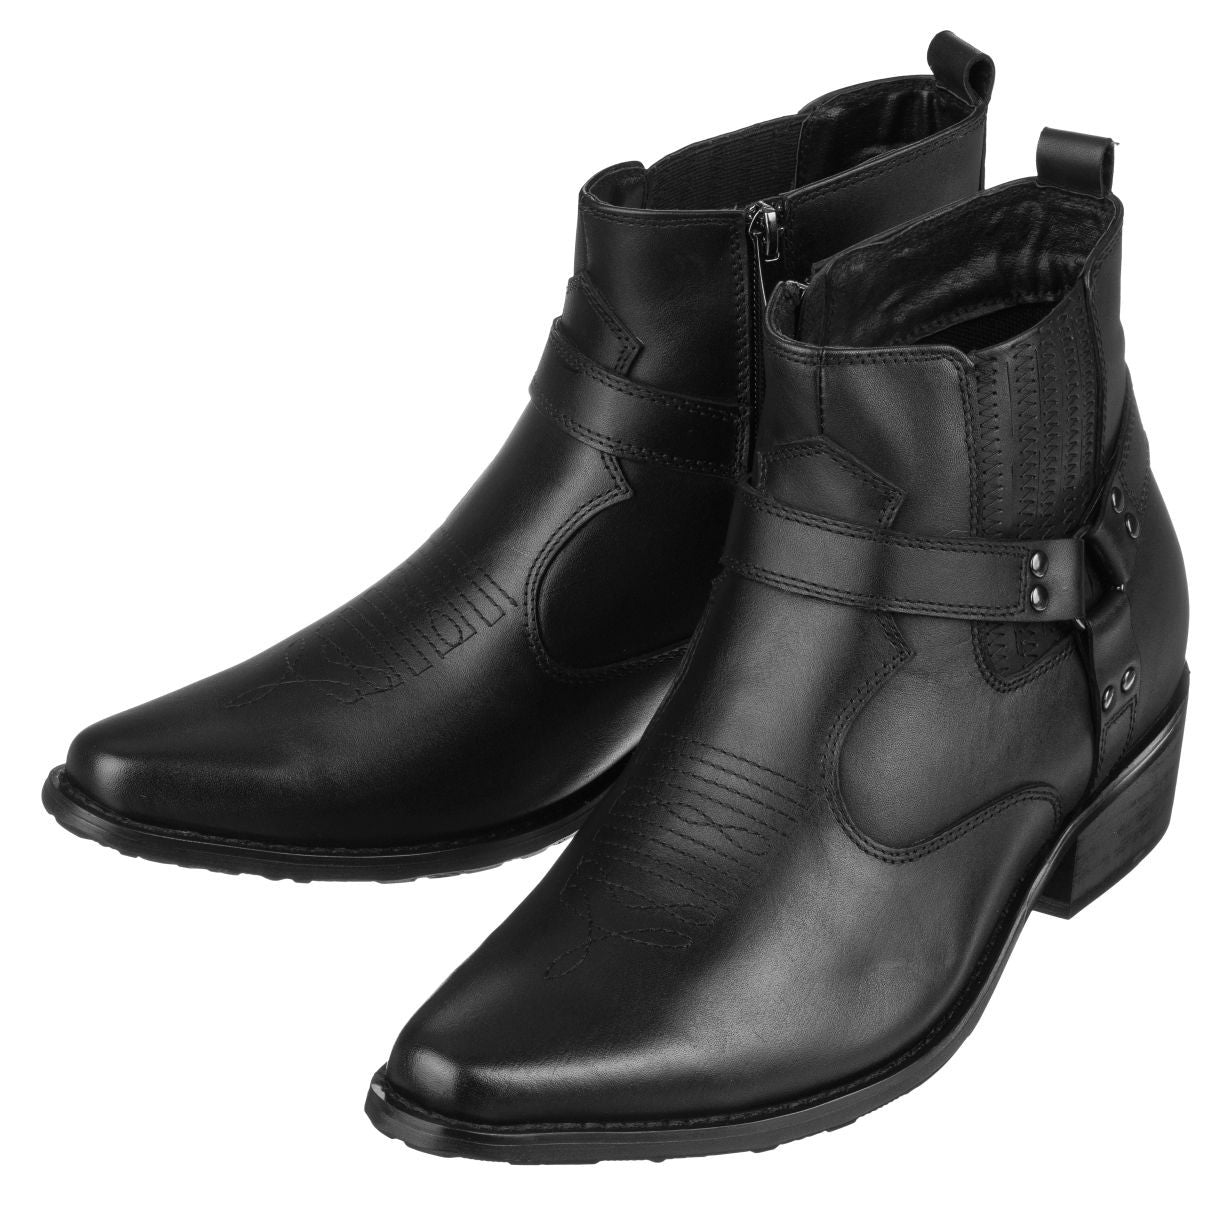 Elevator shoes height increase CALTO - T8112 - 3.3 Inches Taller (Black) - Zipper Boots